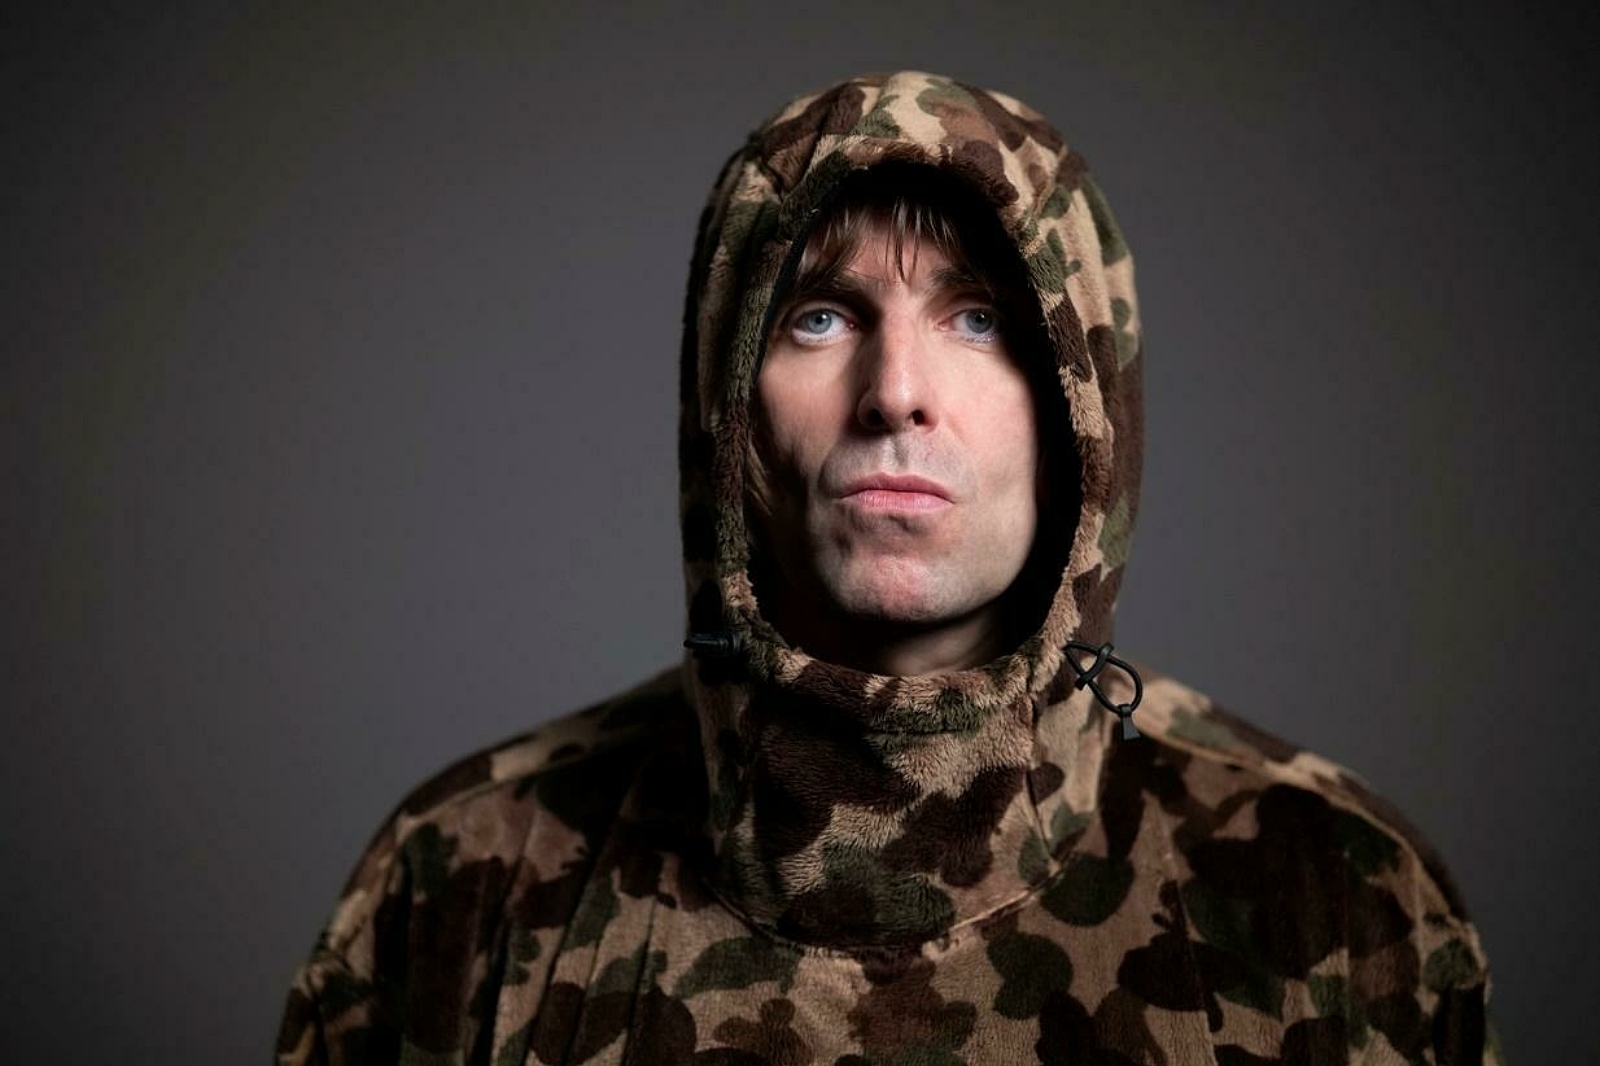 Liam Gallagher unleashes new track 'C'mon You Know'